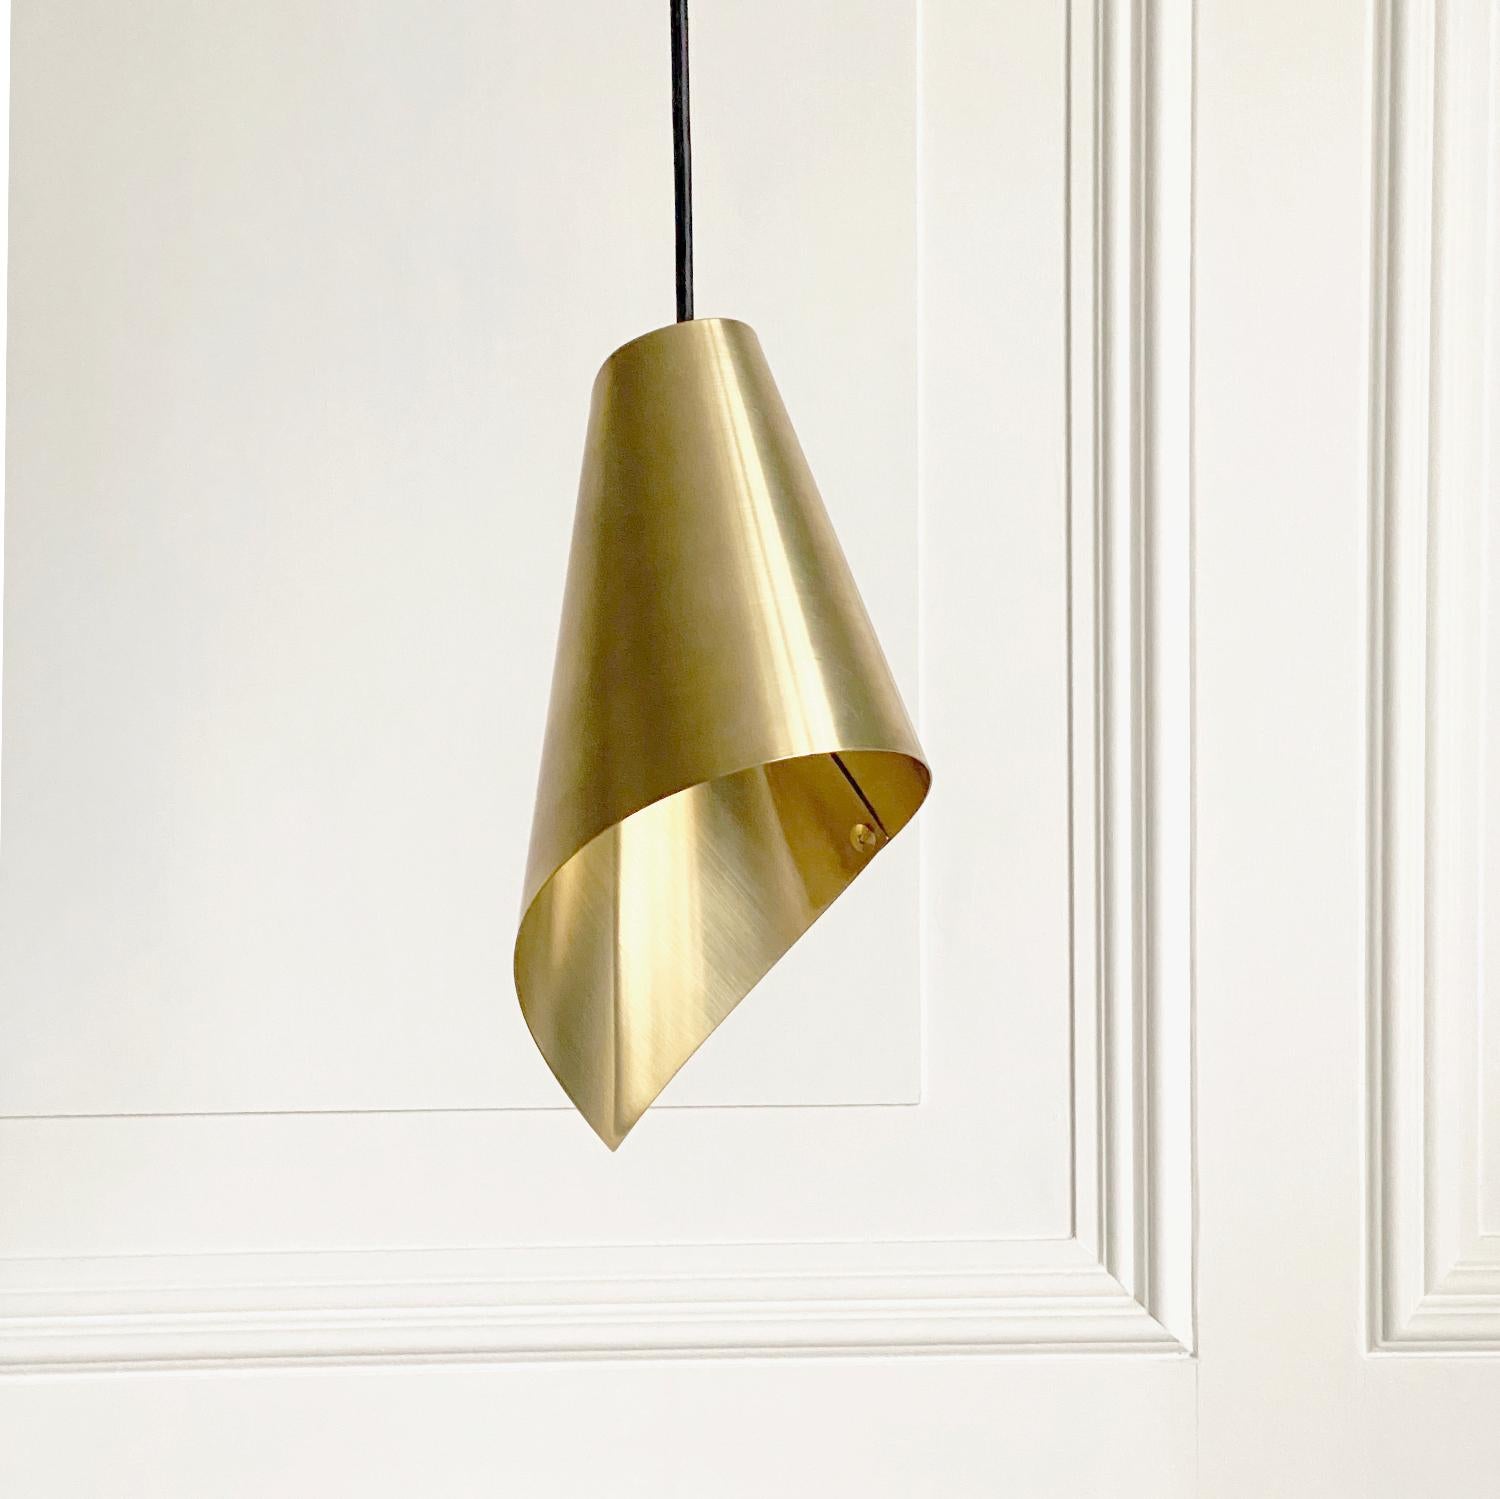 The brushed brass ARC MAXI pendant light can be used in many different configurations to stunning effect. Hang singles or in rows to create individual pools of light or in clusters of 3 or 5 to give wider illumination.

Hand wrapped from a single